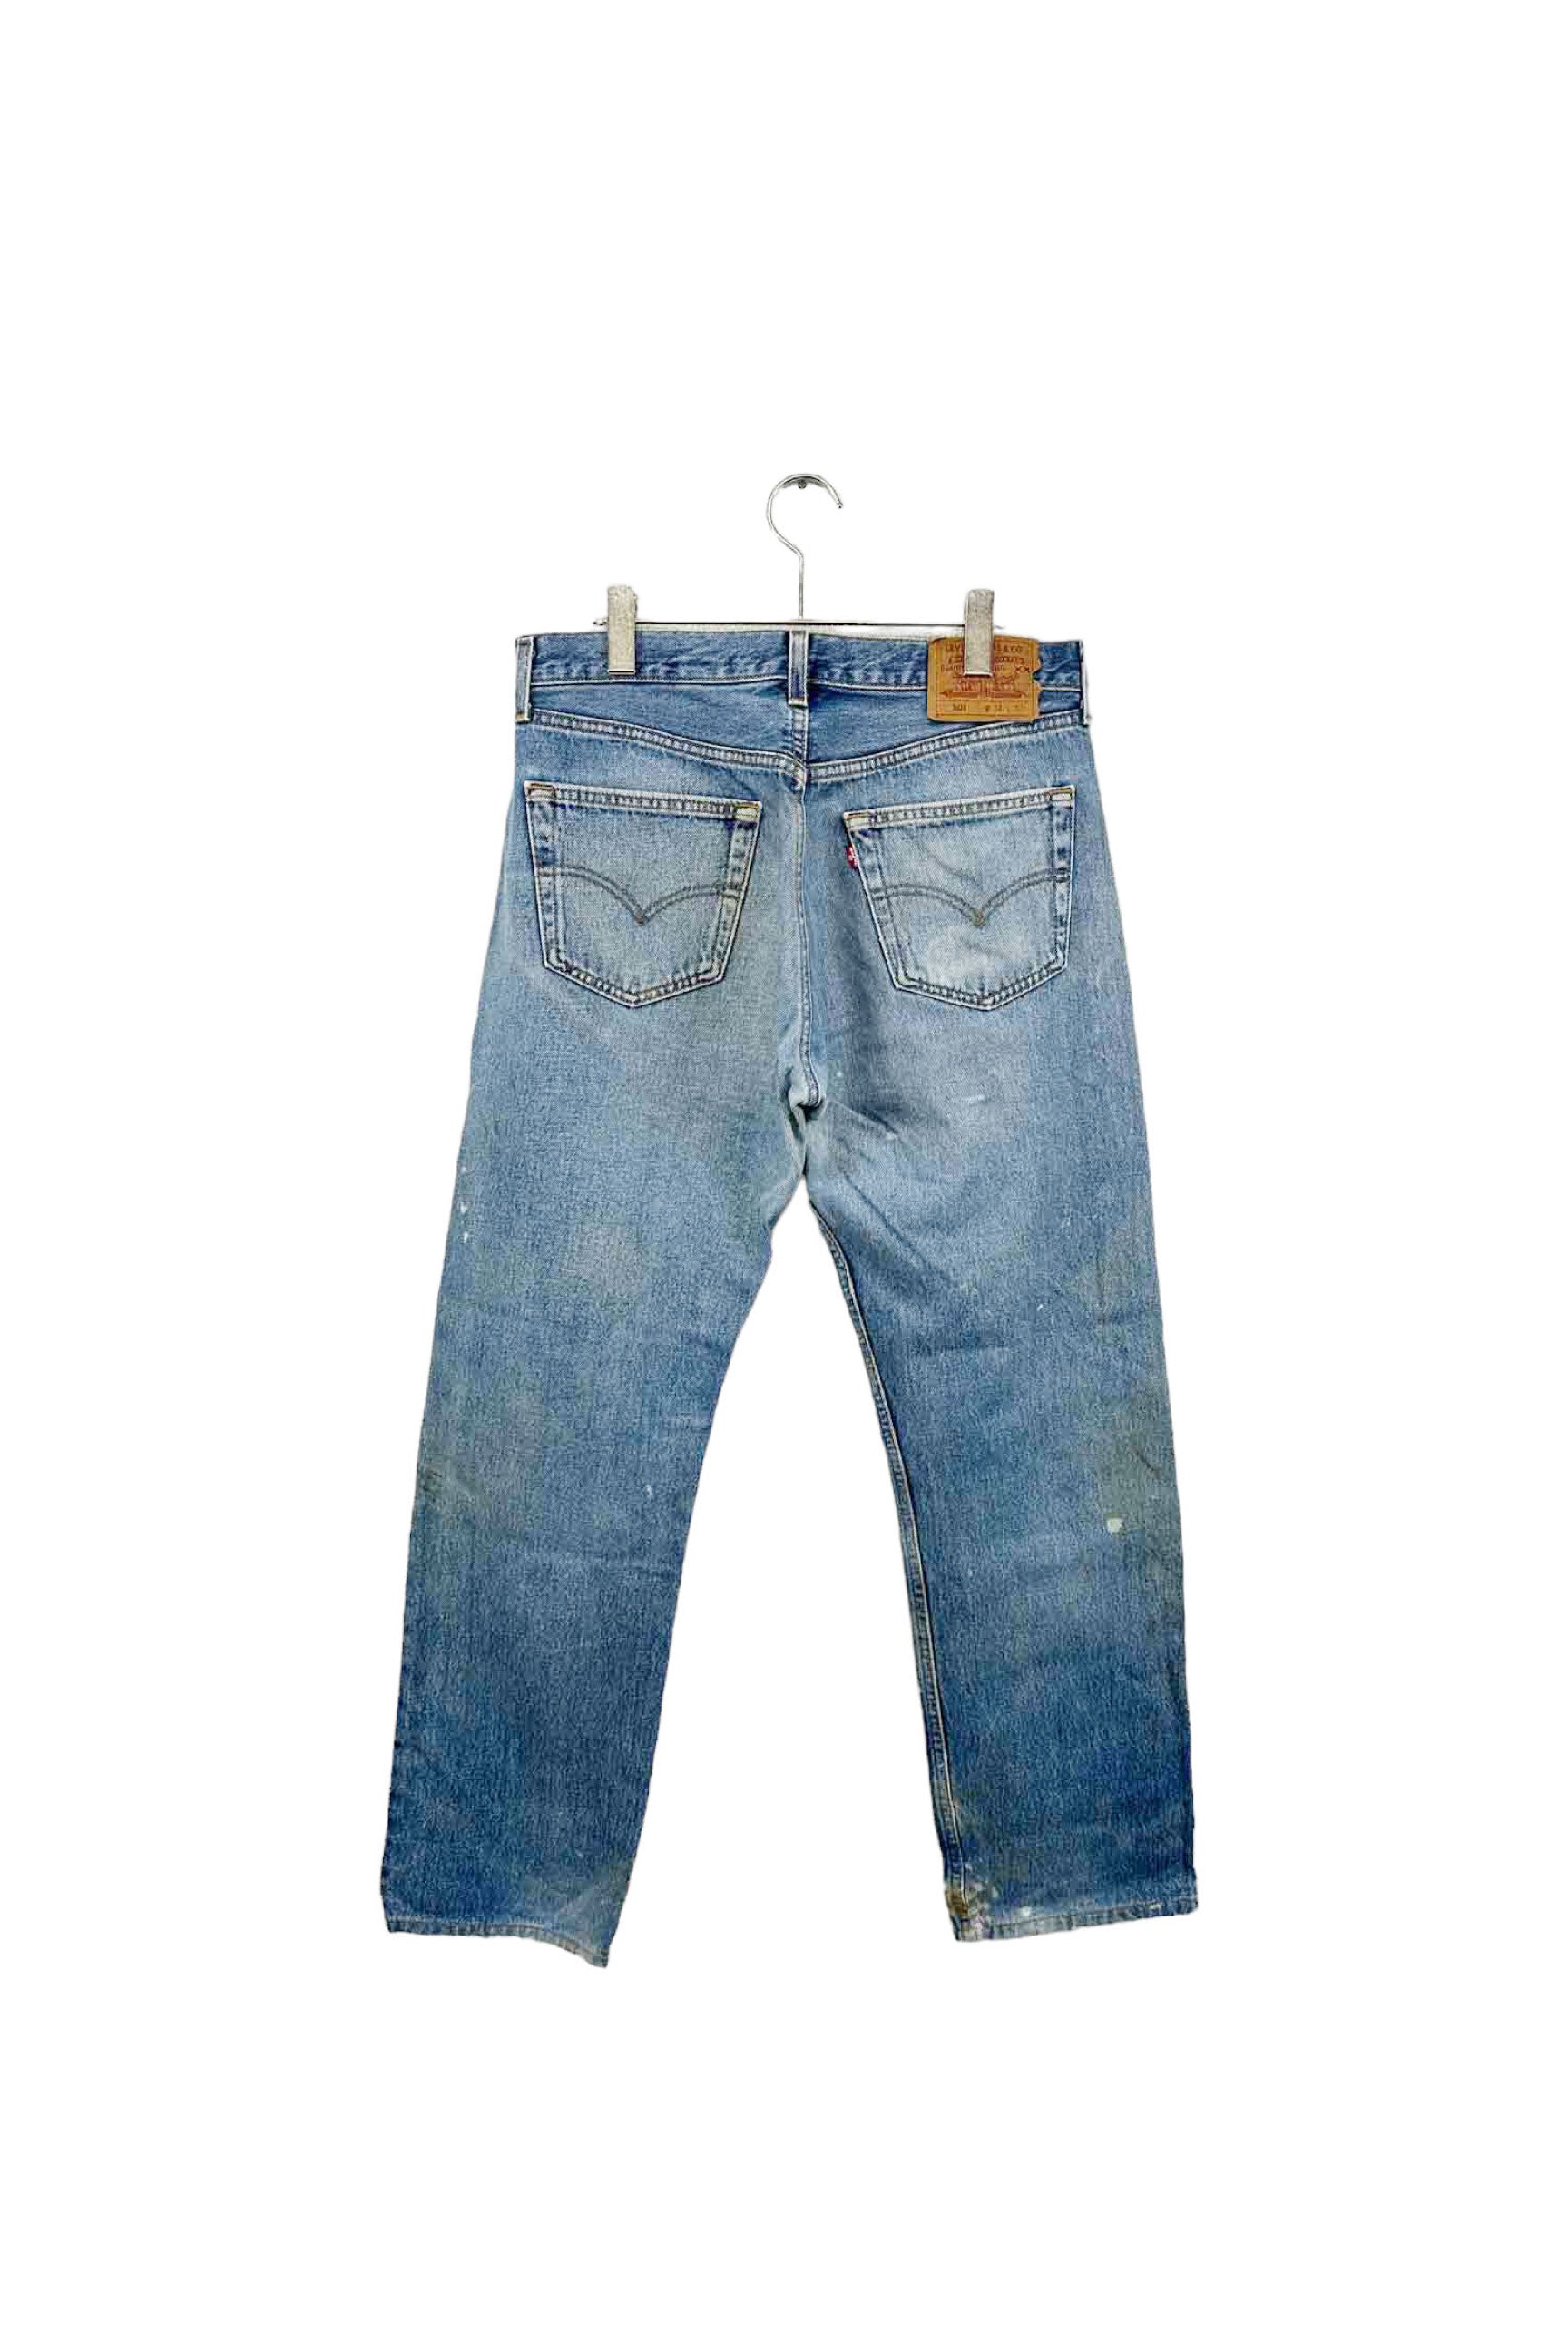 90's Made in USA Levi's 501 W34L32 denim pants – ReSCOUNT STORE